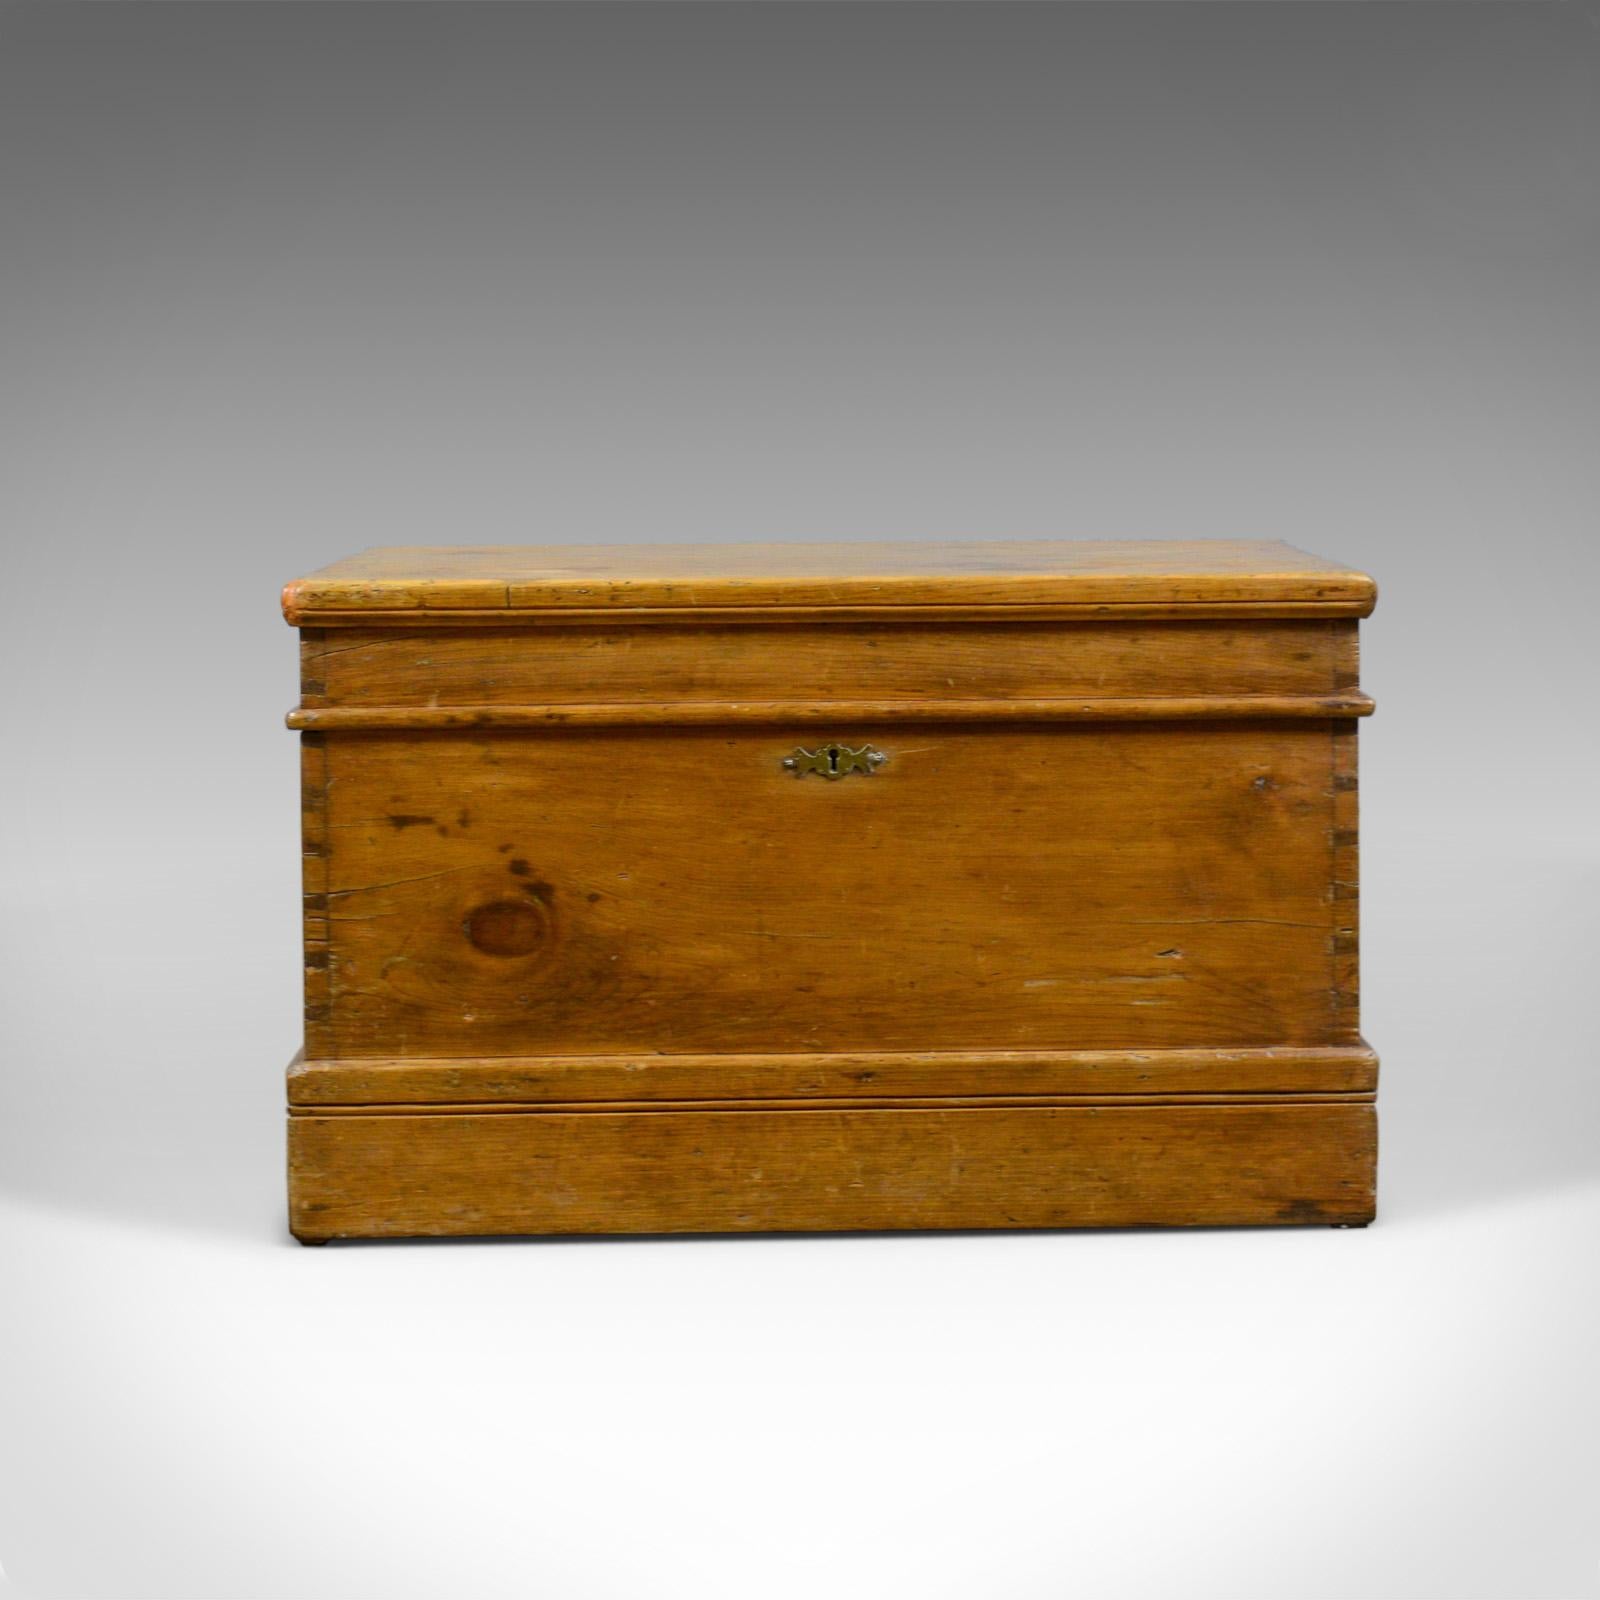 This is an antique pine carriage chest. An English, Victorian, blanket box or trunk, dating to the late 19th century, circa 1890.

Warm hues in the waxed finish to the antique pine 
Attractive 'through' dovetail joints and grain interest